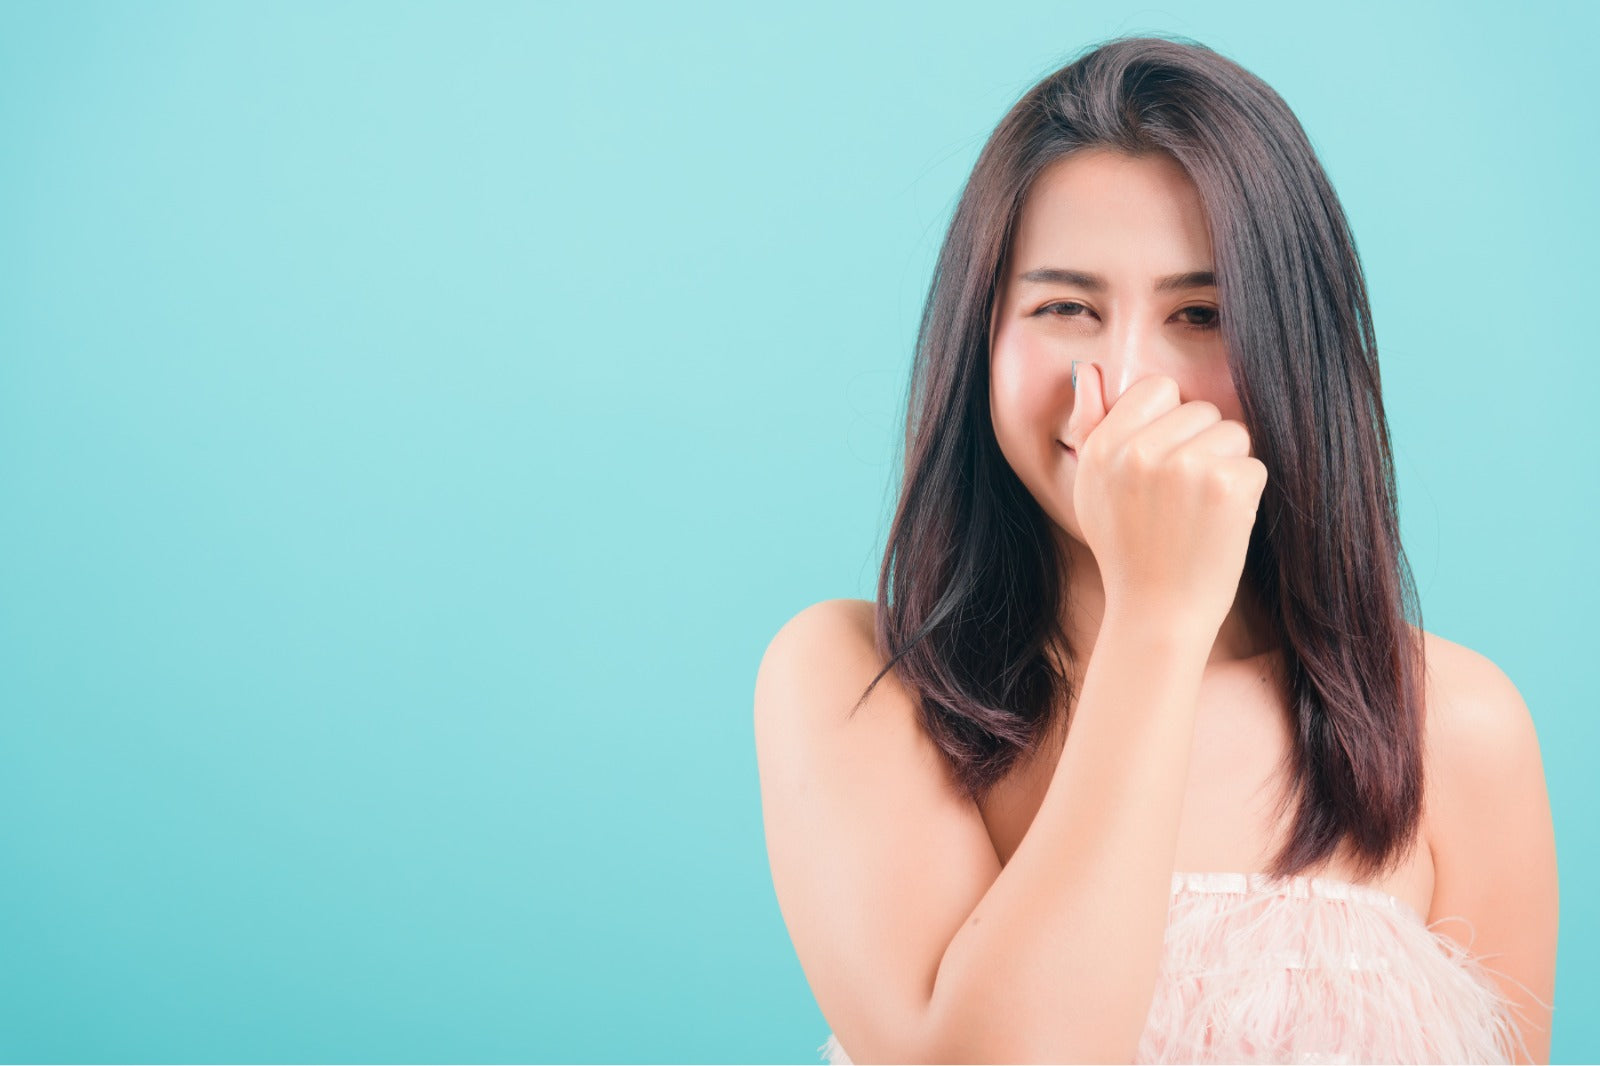 Body odor: Causes, prevention, and treatments